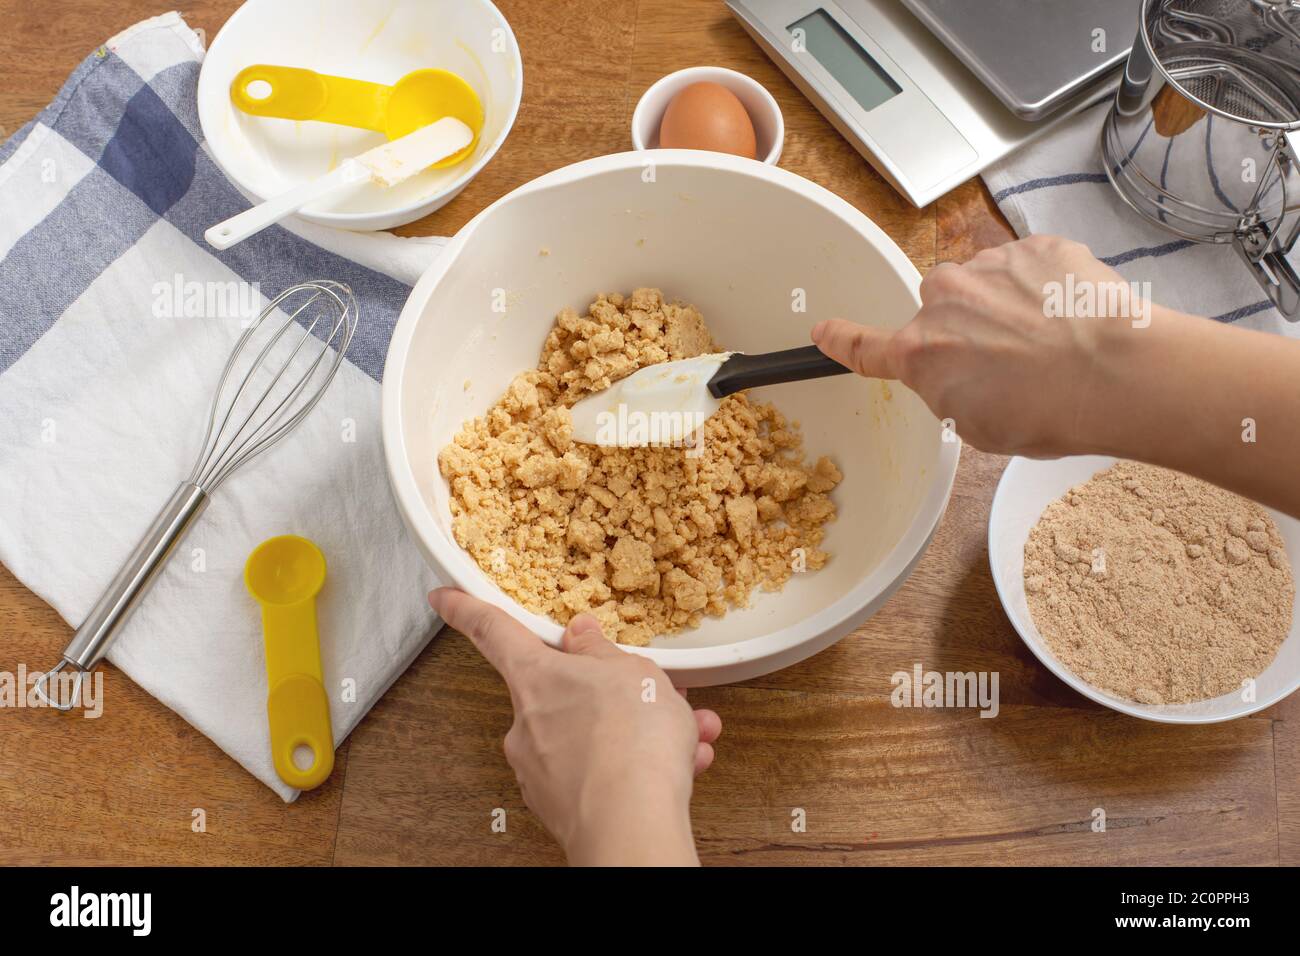 Bowl of mixing dough in messy kitchen - Stock Image - F005/2392